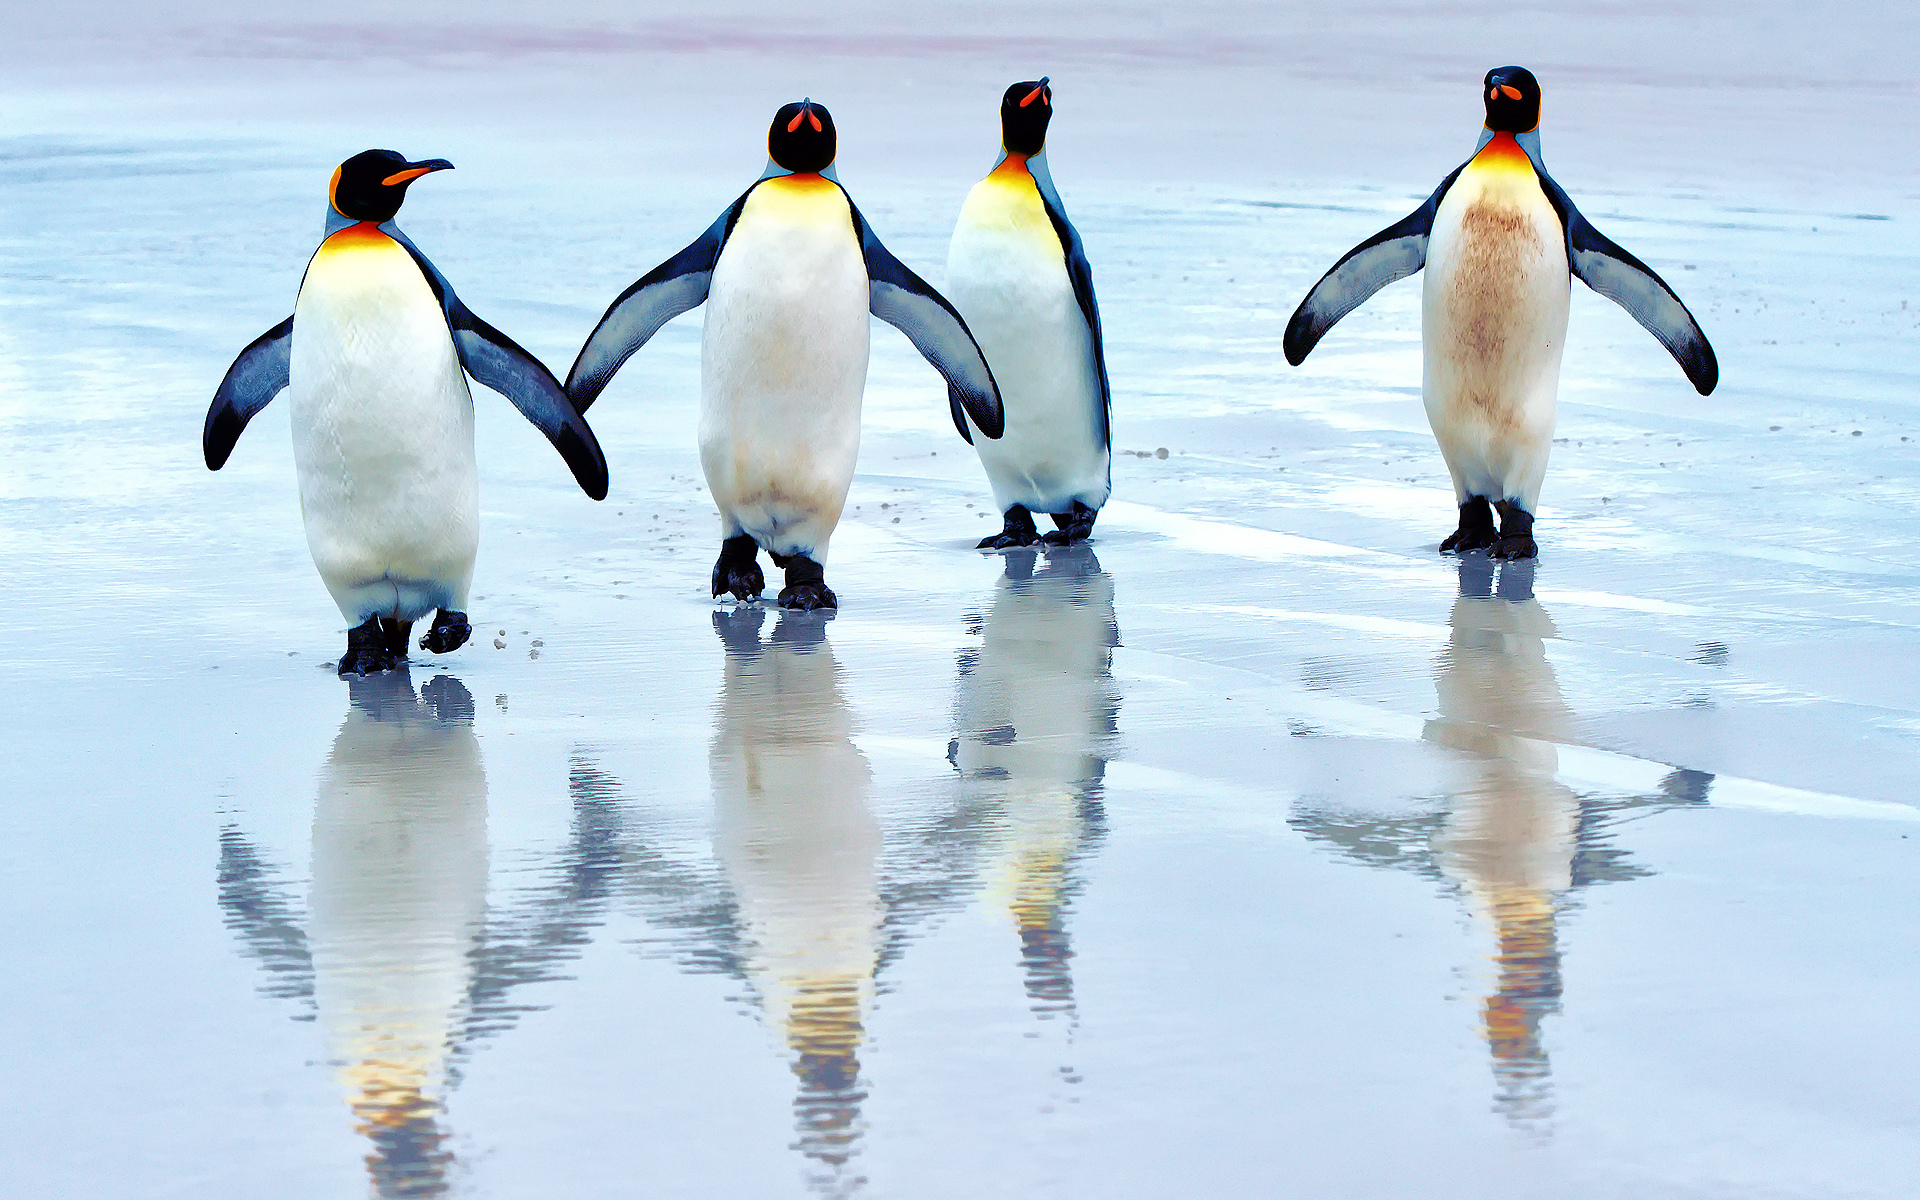 Four king penguins walking on the ice - HD wallpaper download ...